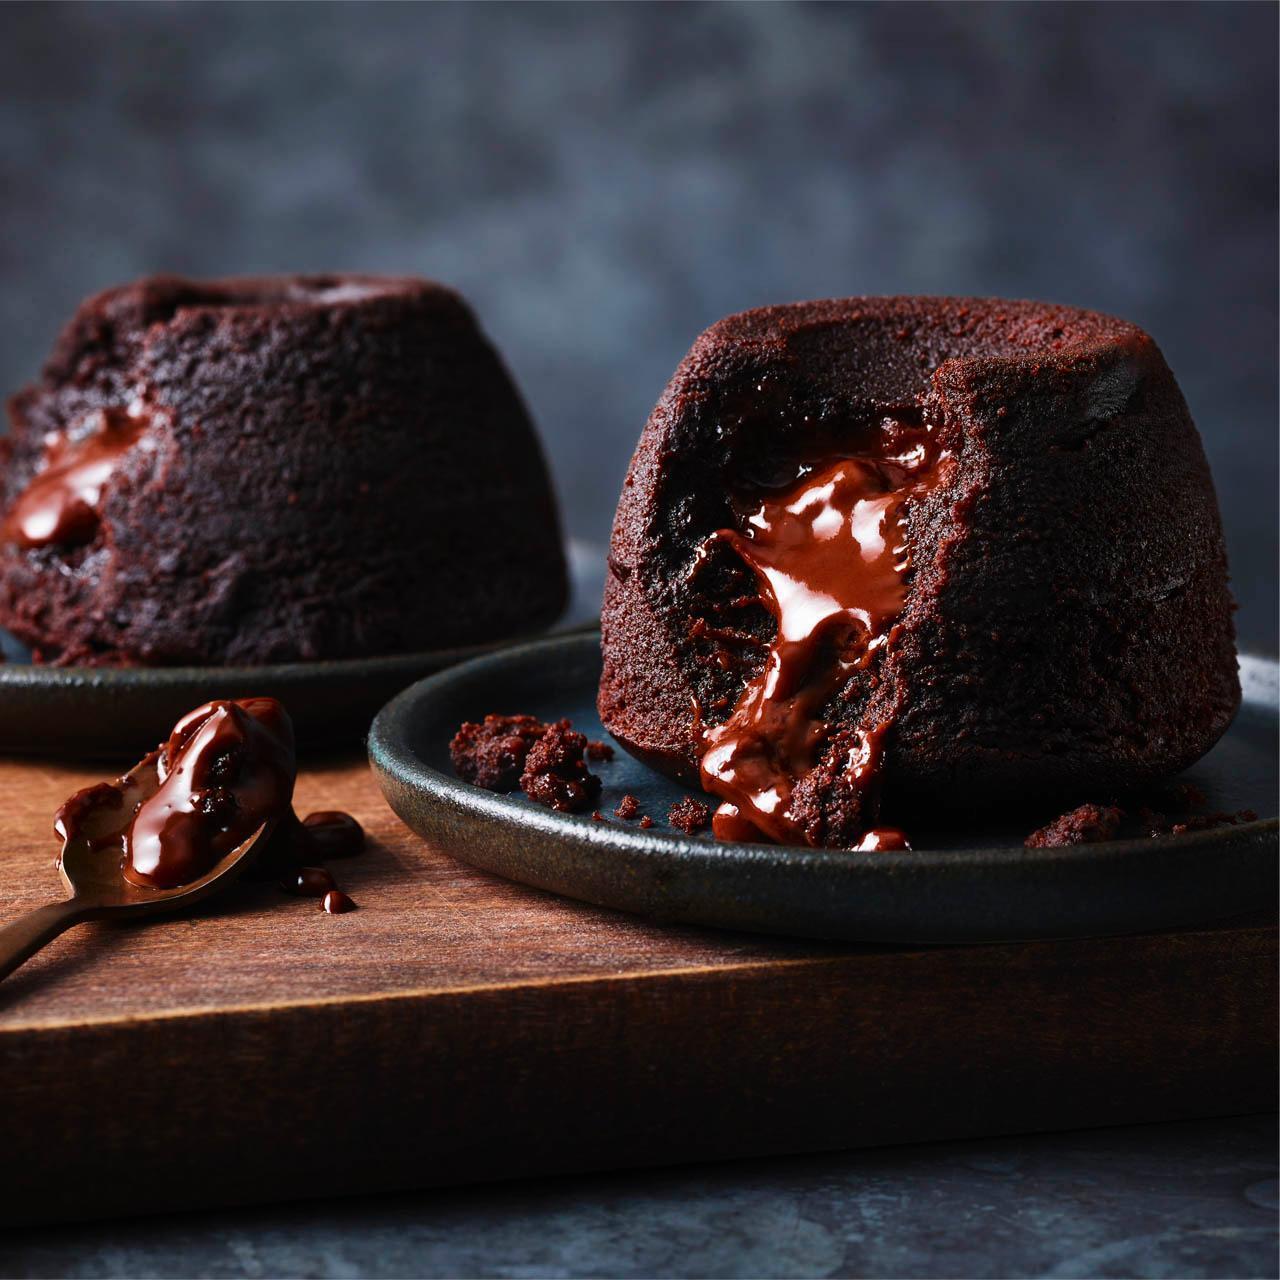 M&S 2 Chocolate Melt in the Middle Puddings 310g